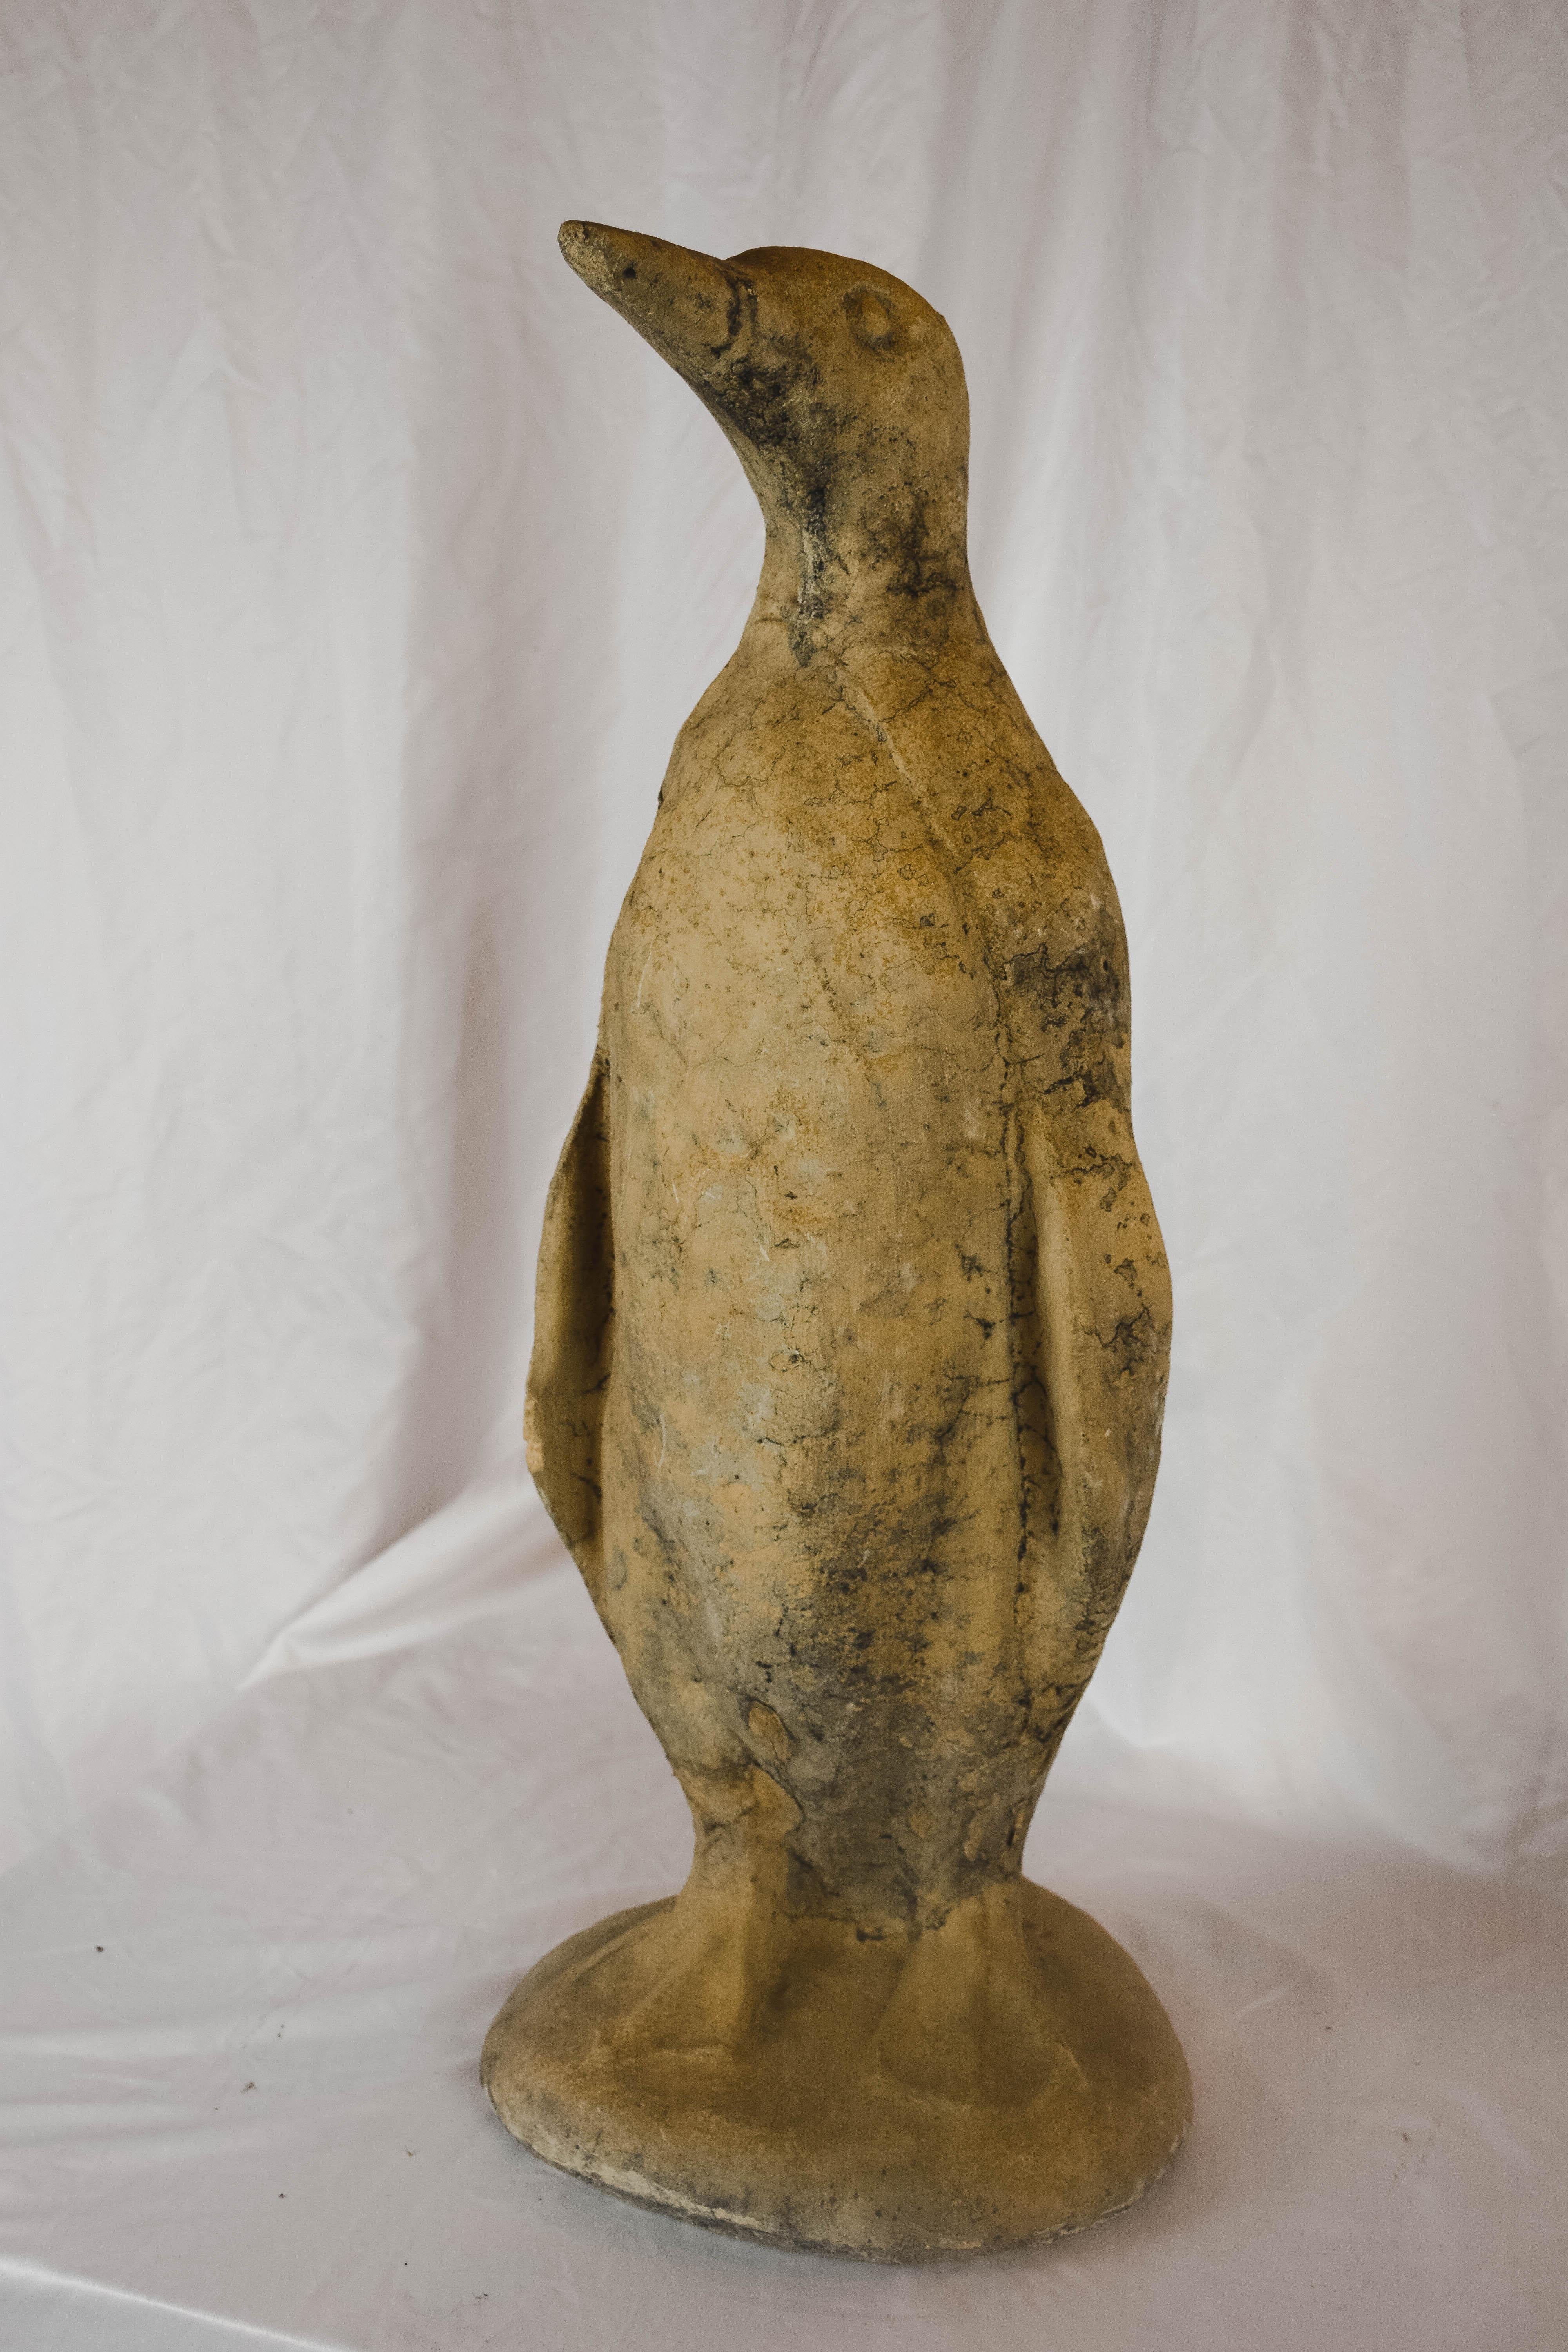 Found in Southern France, this charming vintage concrete garden element in the form of a penguin has wonderful aged patina. Would be wonderful both outdoors or in. 

2 available.